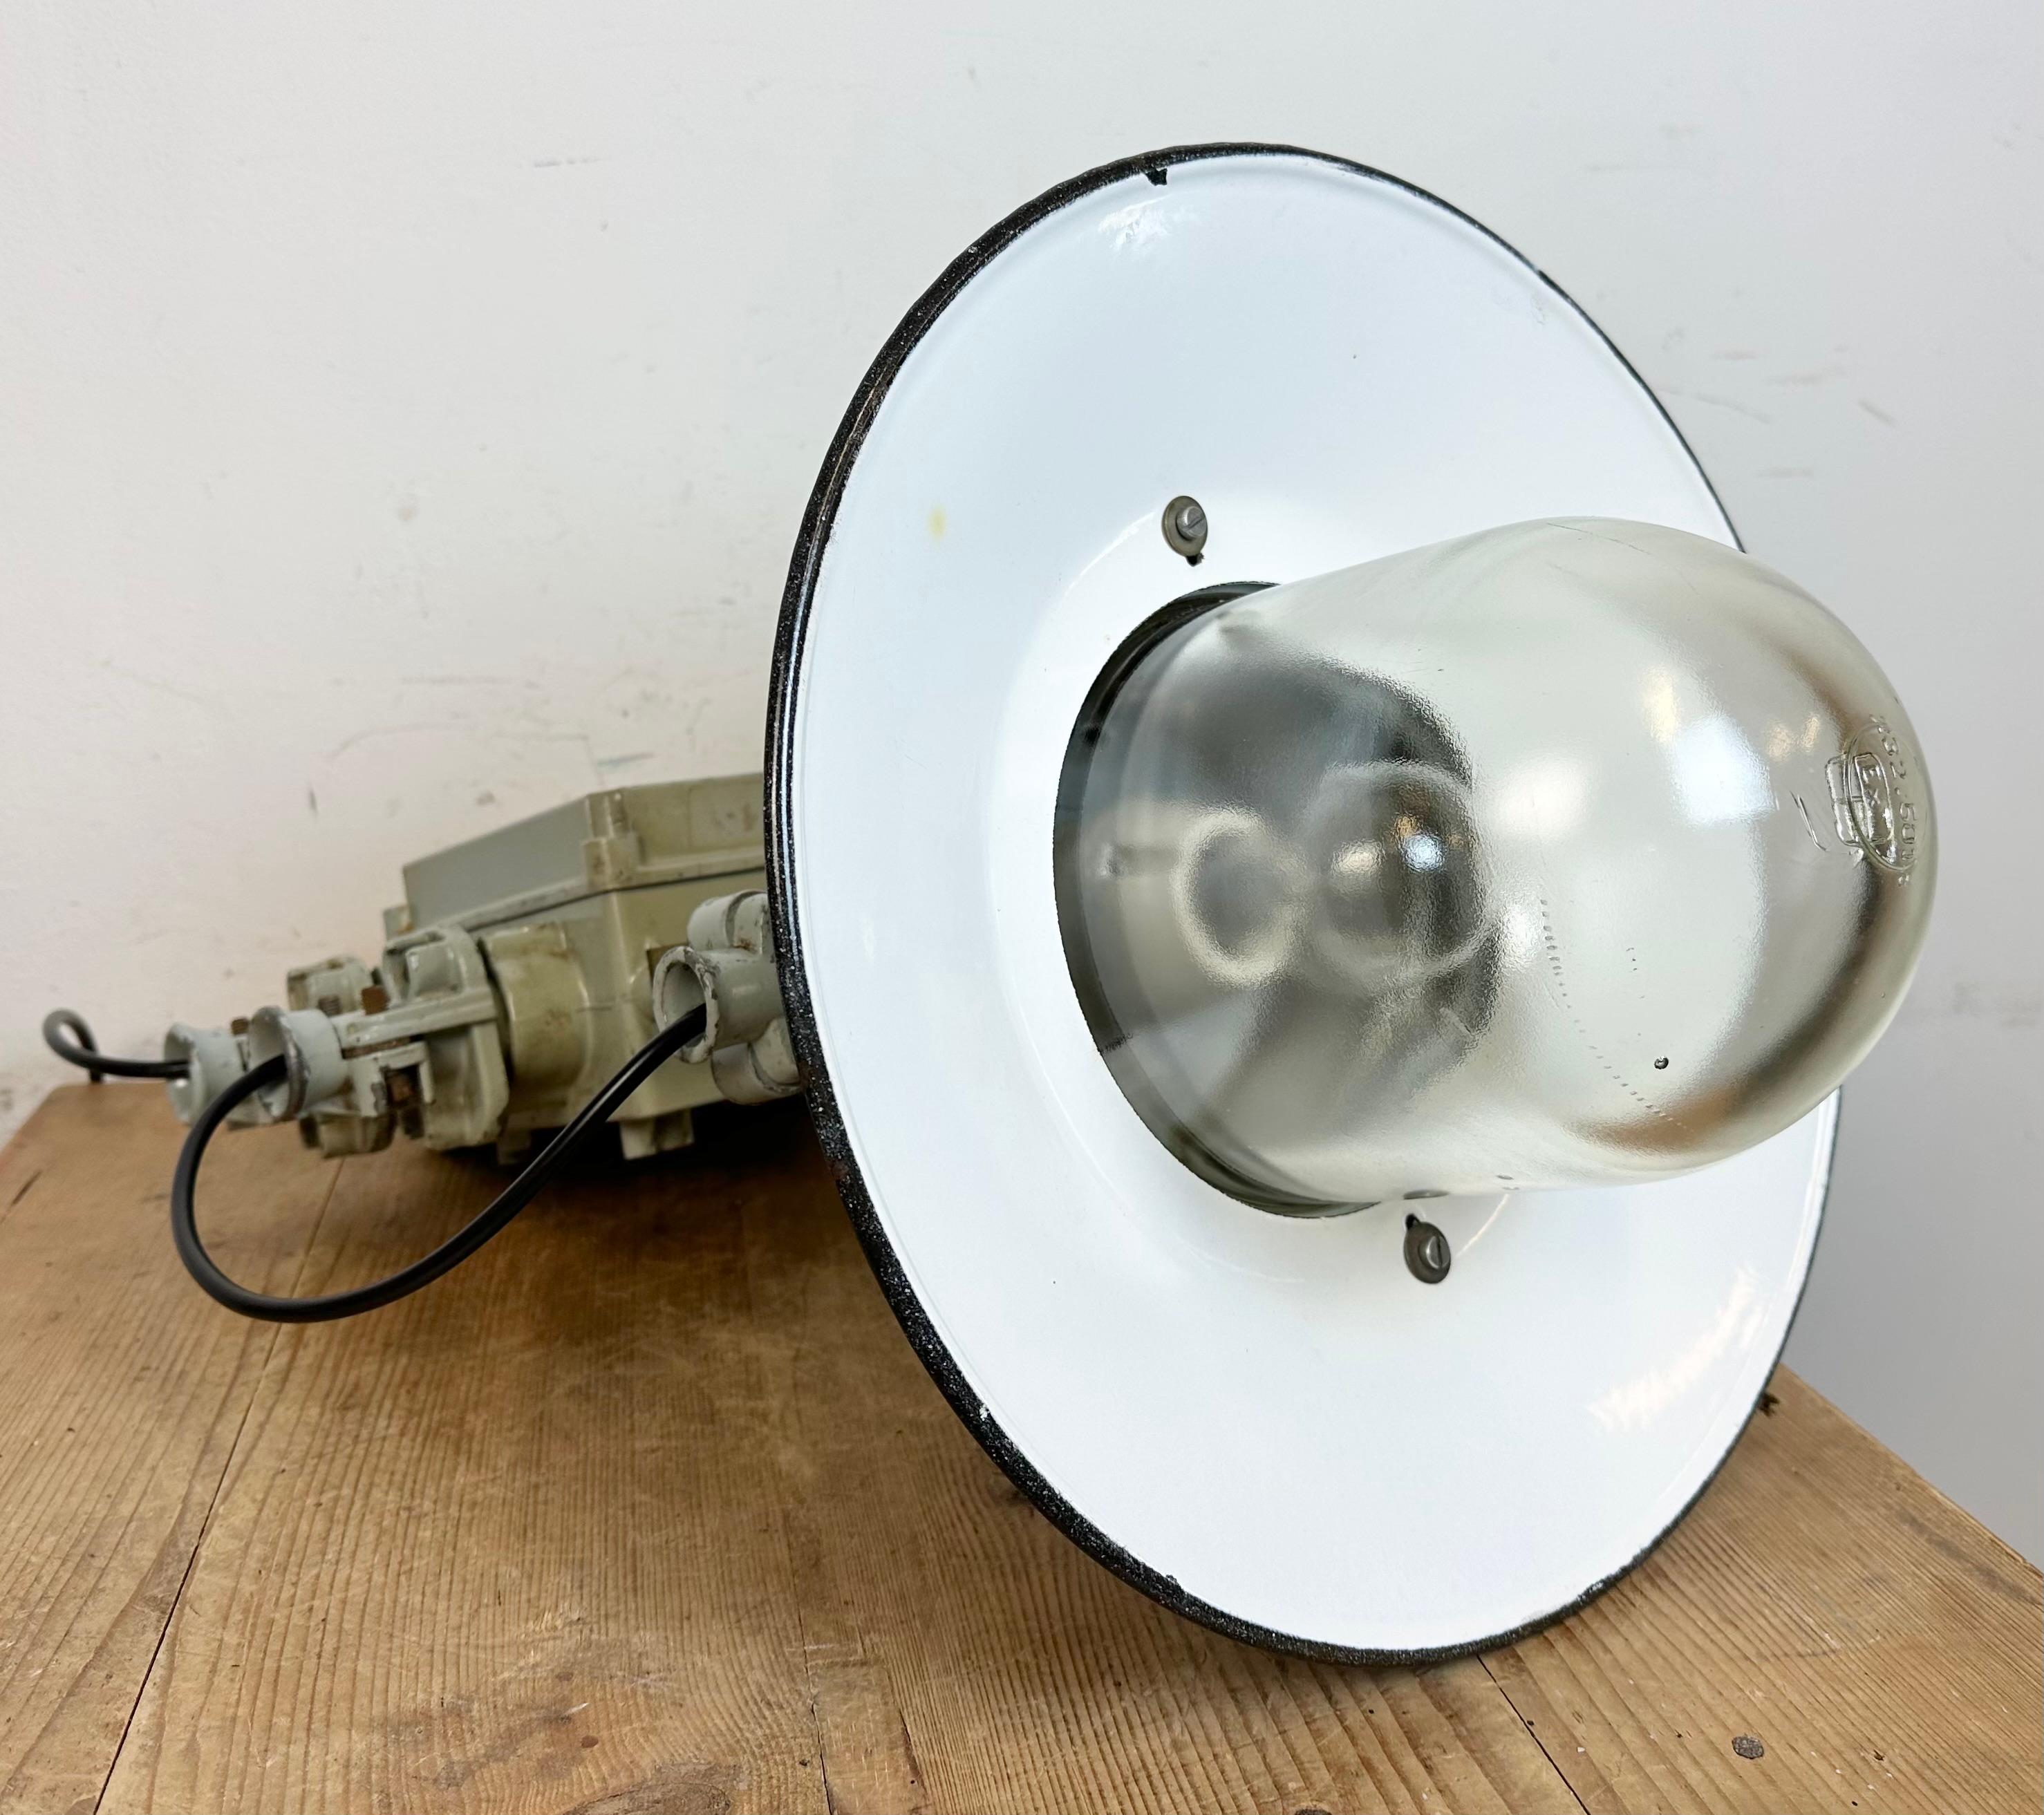 Grey Cast Aluminium Explosion Proof Lamp with Enameled Shade, 1970s For Sale 13